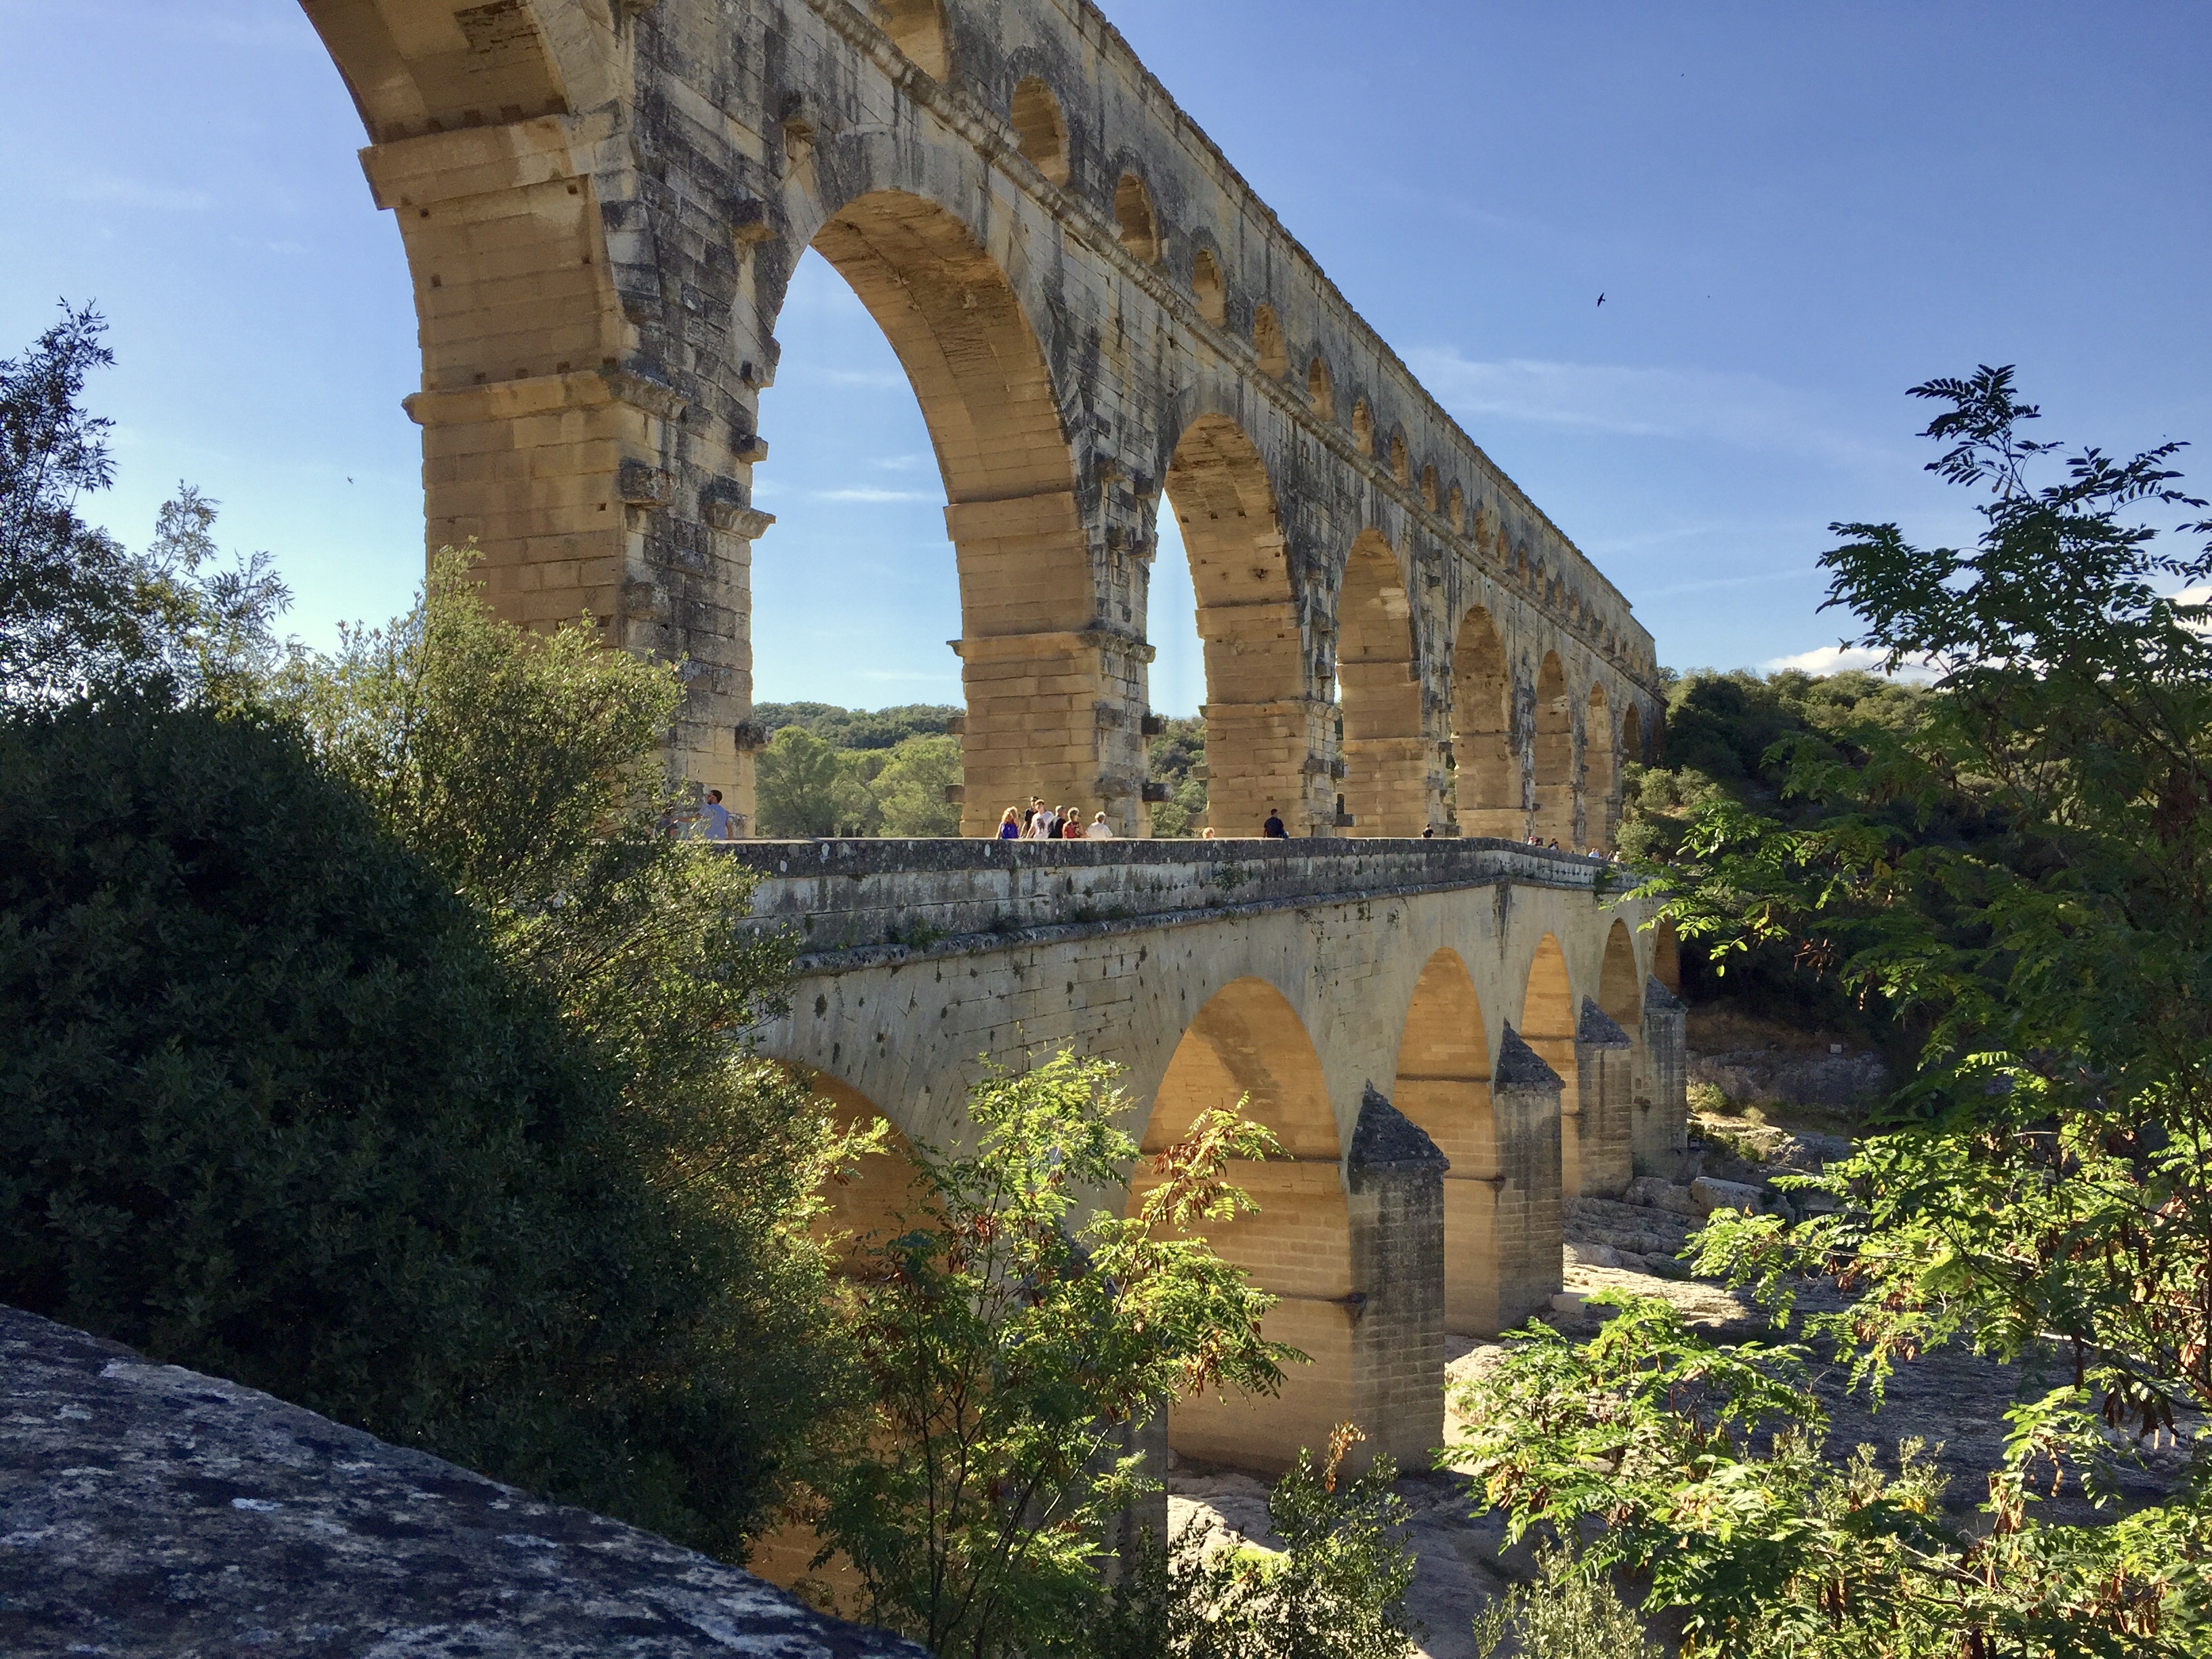 a stone bridge with arches and trees with Tarragona in the background